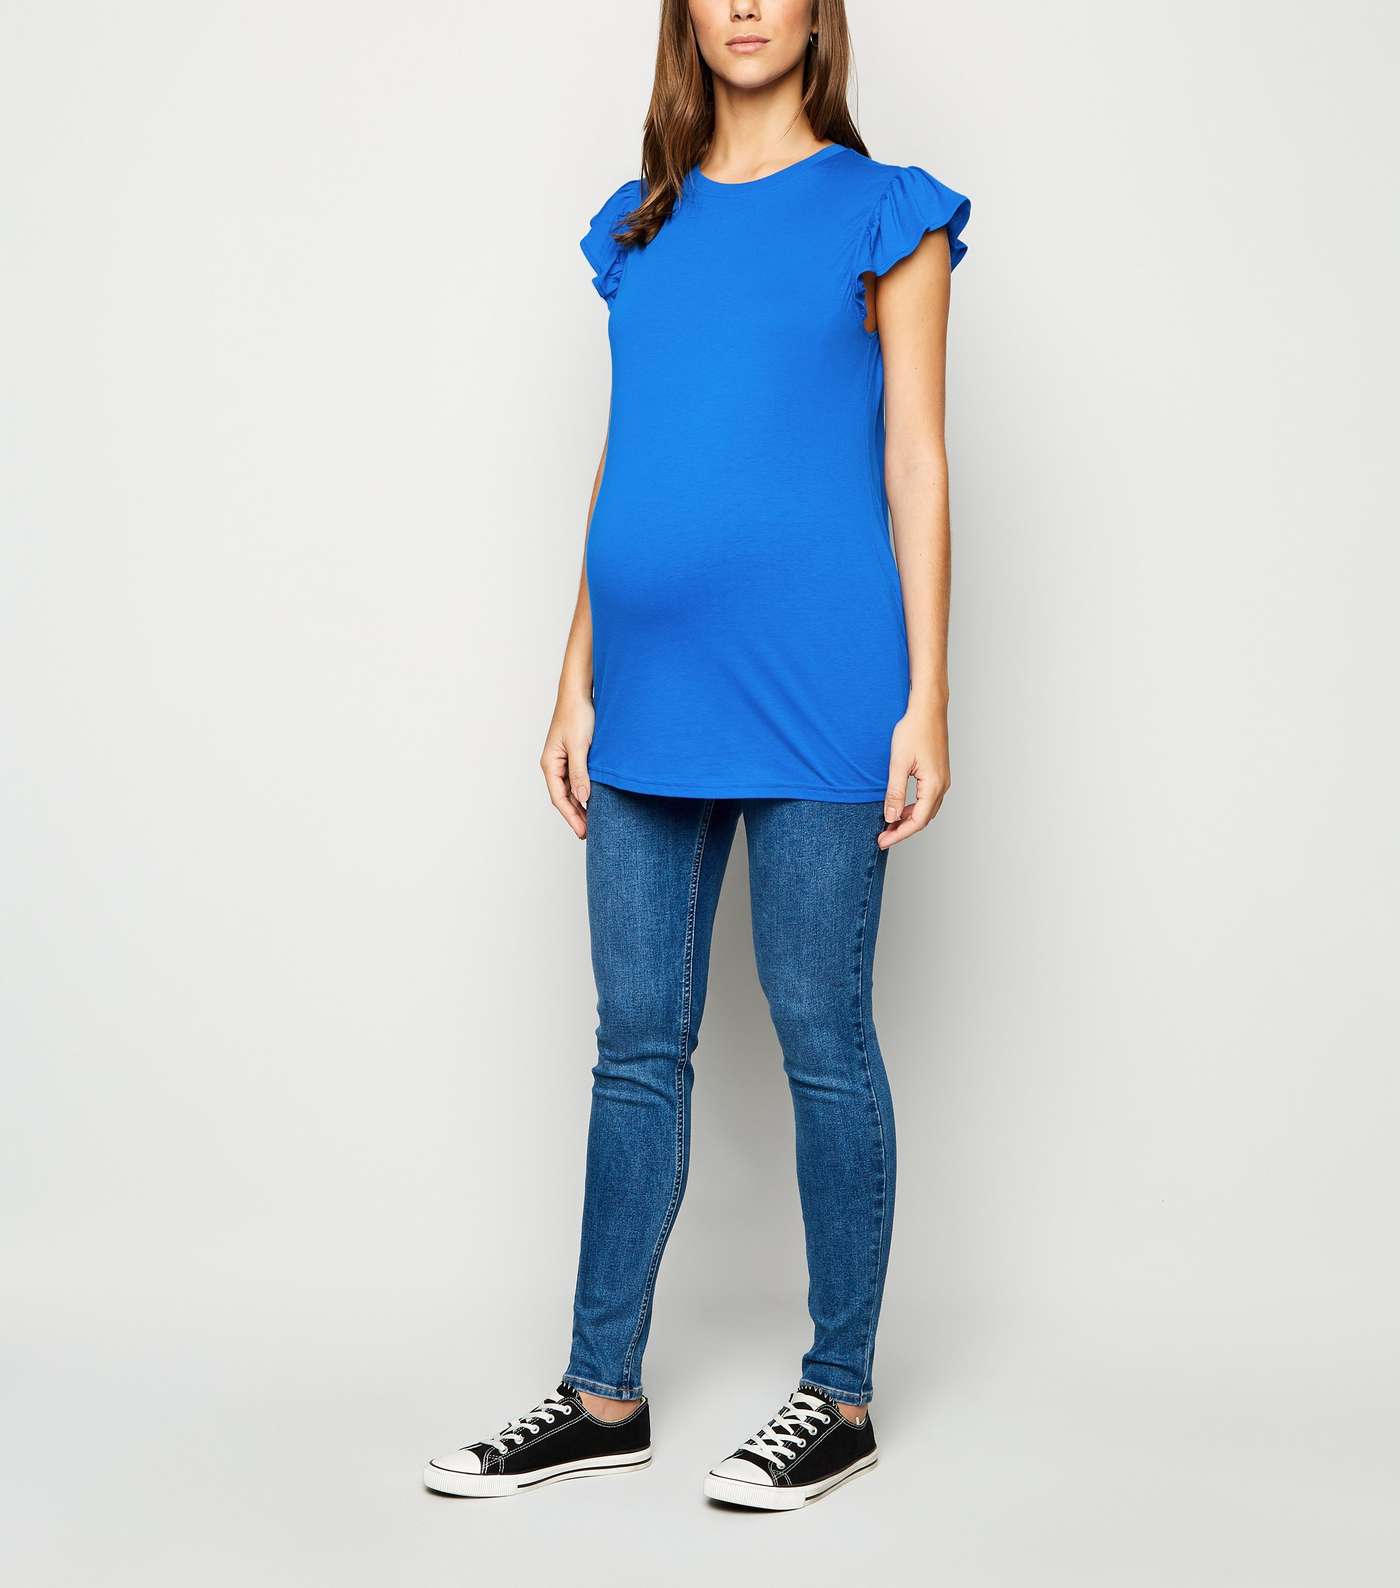 Maternity Bright Blue Frill Sleeve Top Image 2